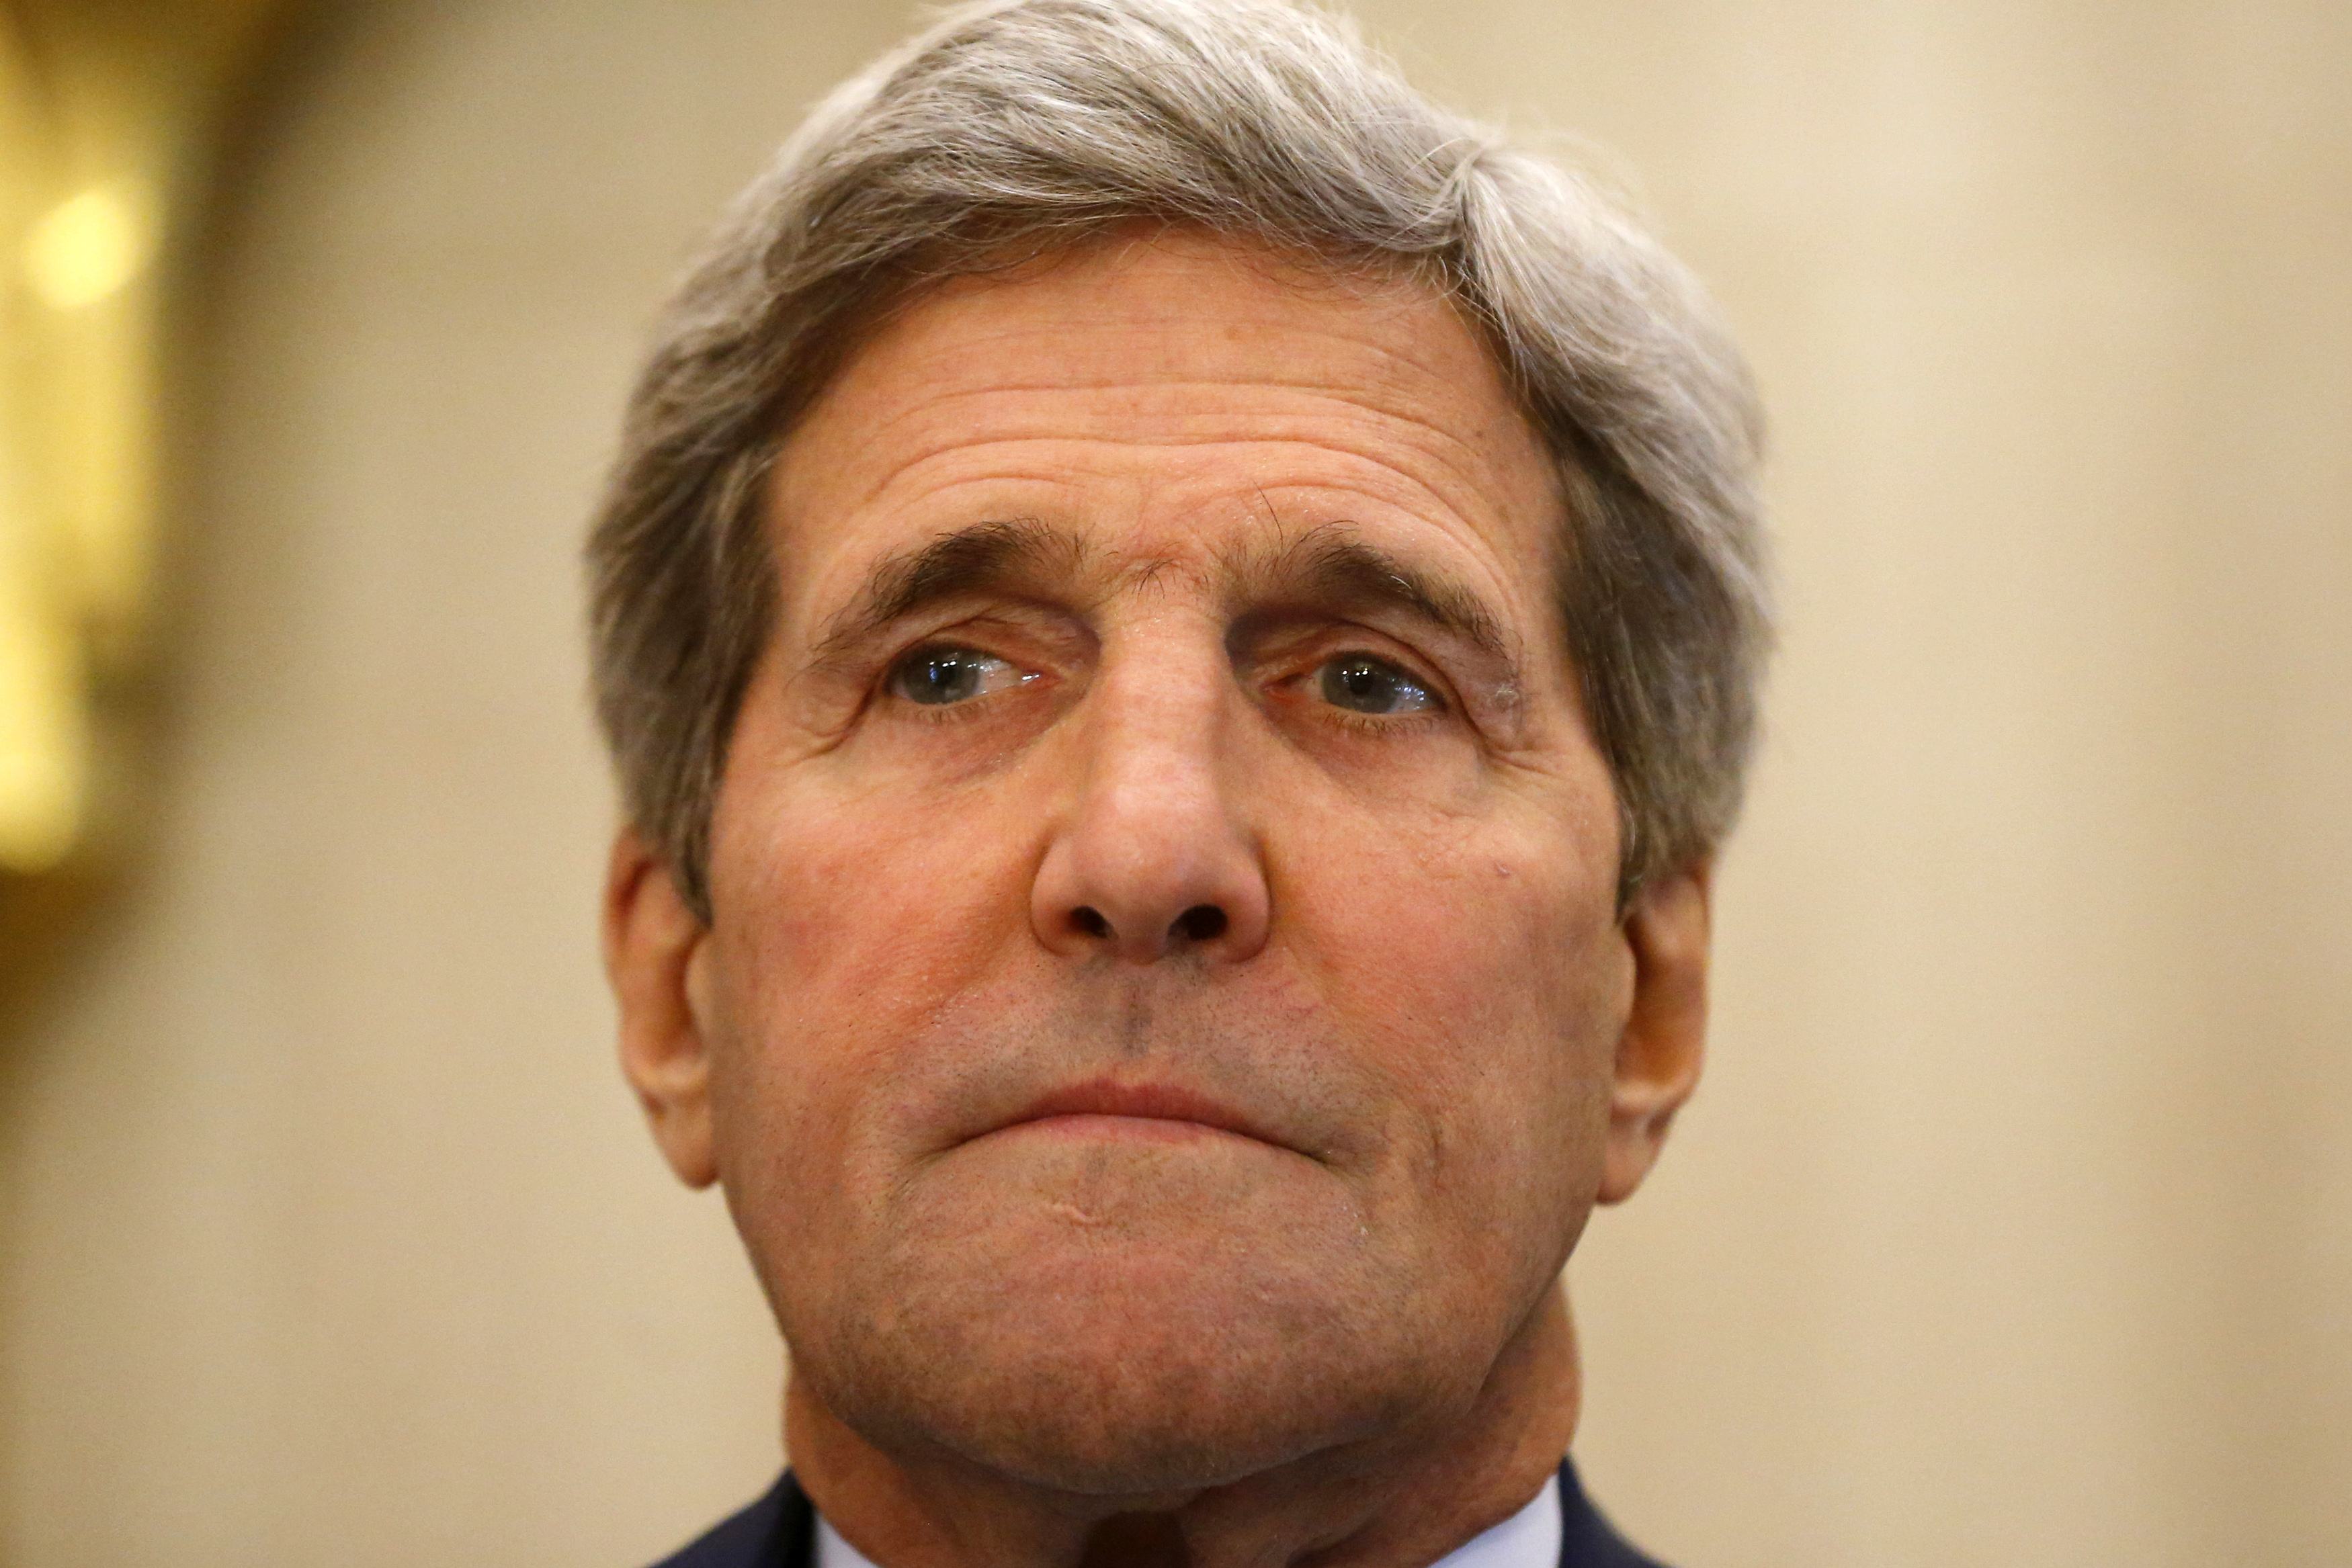 Kerry urges Hamas to end conflict, has 'constructive' Egypt talks